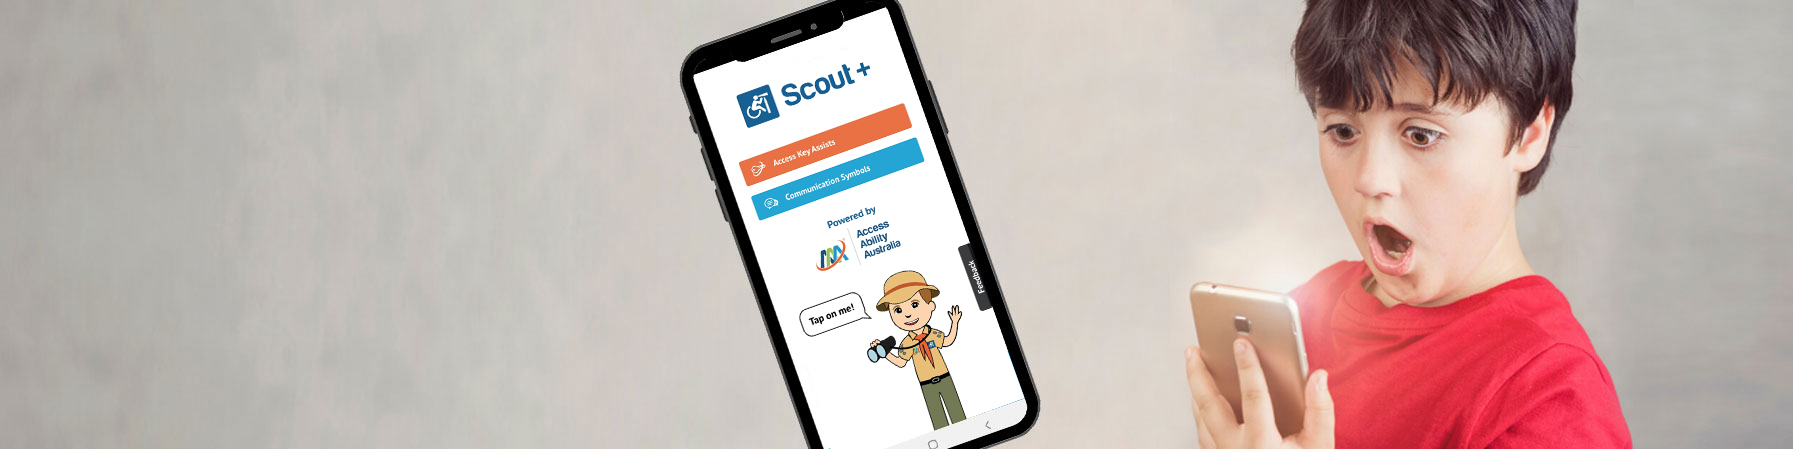 Mobile phone displaying Scout+ app homescreen and young boy holding another mobile phone with an expression of surprise on his face